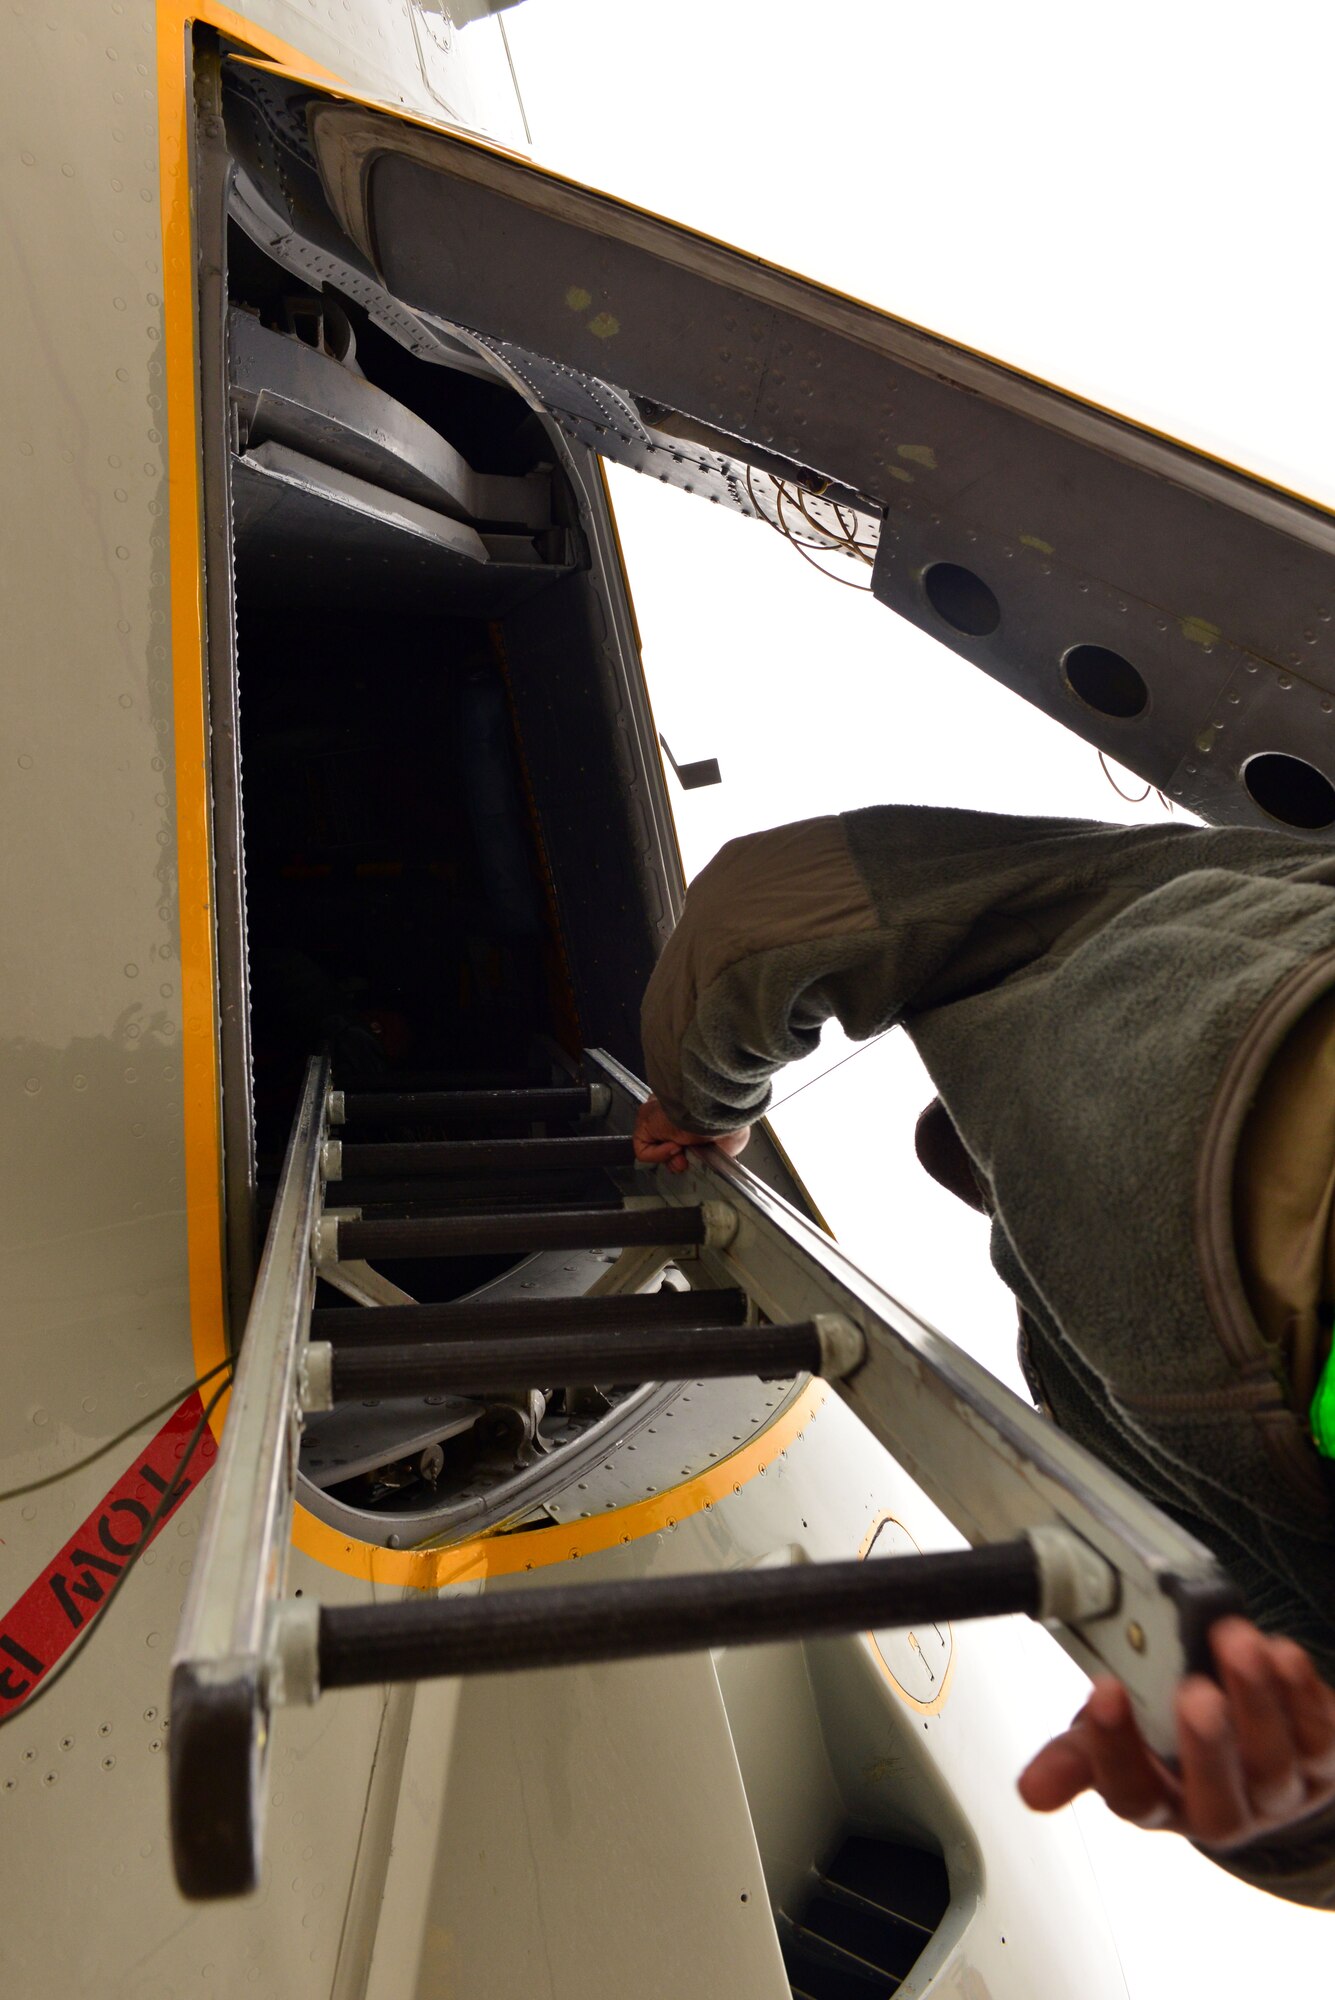 Airman First Class Clinton Woods III, a crew chief with the 55th Maintenance Group, stows the crew entry ladder while preparing to launch an RC-135 V/W Rivet Joint aircraft during Global Thunder 17, U.S. Strategic Command’s annual command post and field training exercise, Oct. 30, 2016, at Offutt Air Force Base, Neb. The exercise provided training opportunities for USSTRATCOM-tasked components, task forces, units and command posts to deter and, if necessary, defeat a military attack against the United States and to employ forces as directed by the President. (U.S. Air Force Photo by Drew Nystrom)